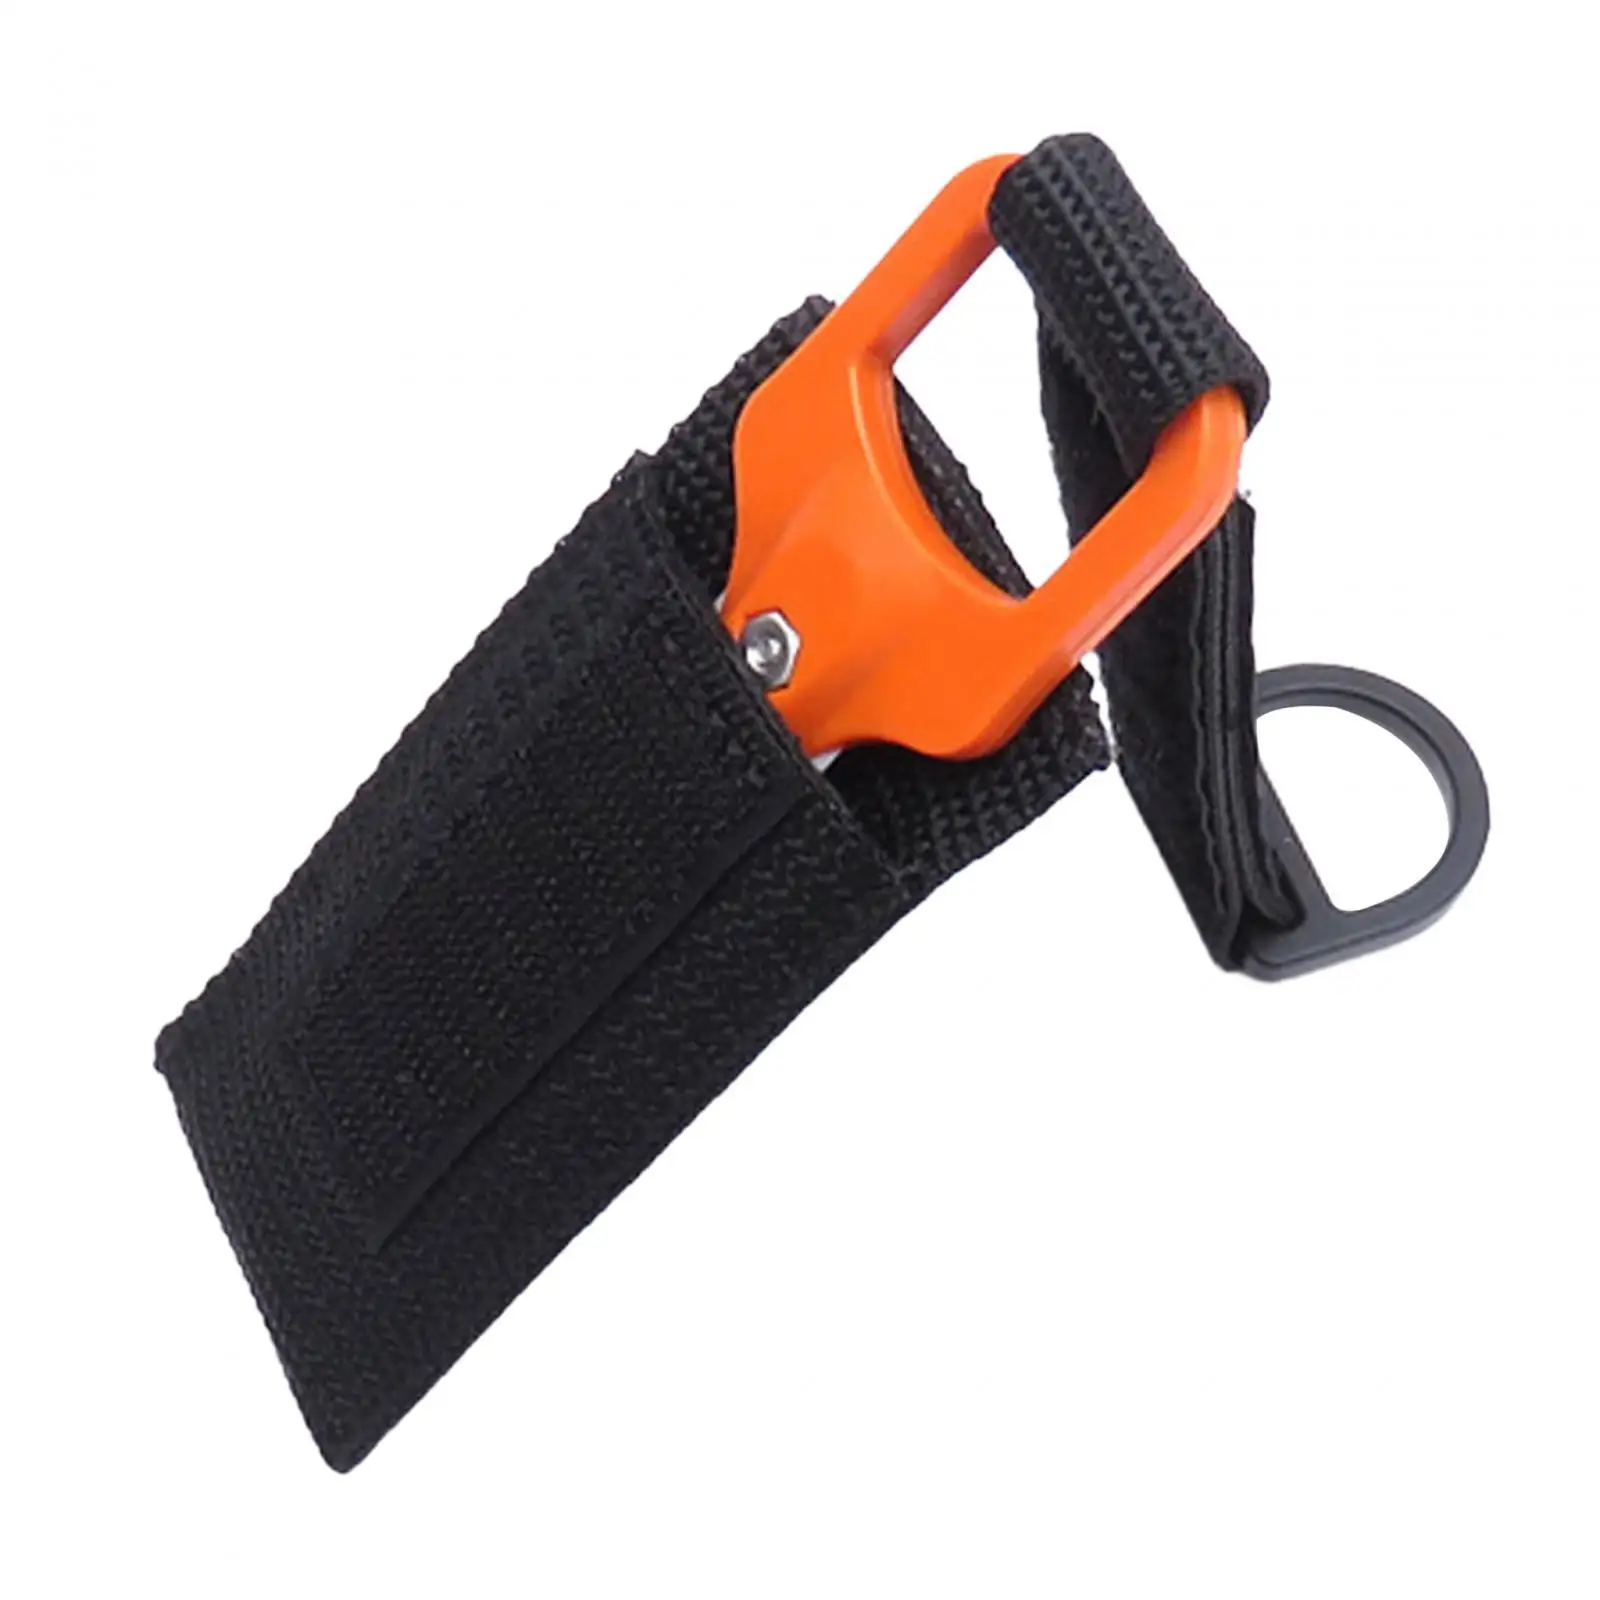 Diving Line Cutter Safety Fishing Line Cutter Portable Diver Line Cutter for Water Sports Freediving Snorkeling Swimming Diving